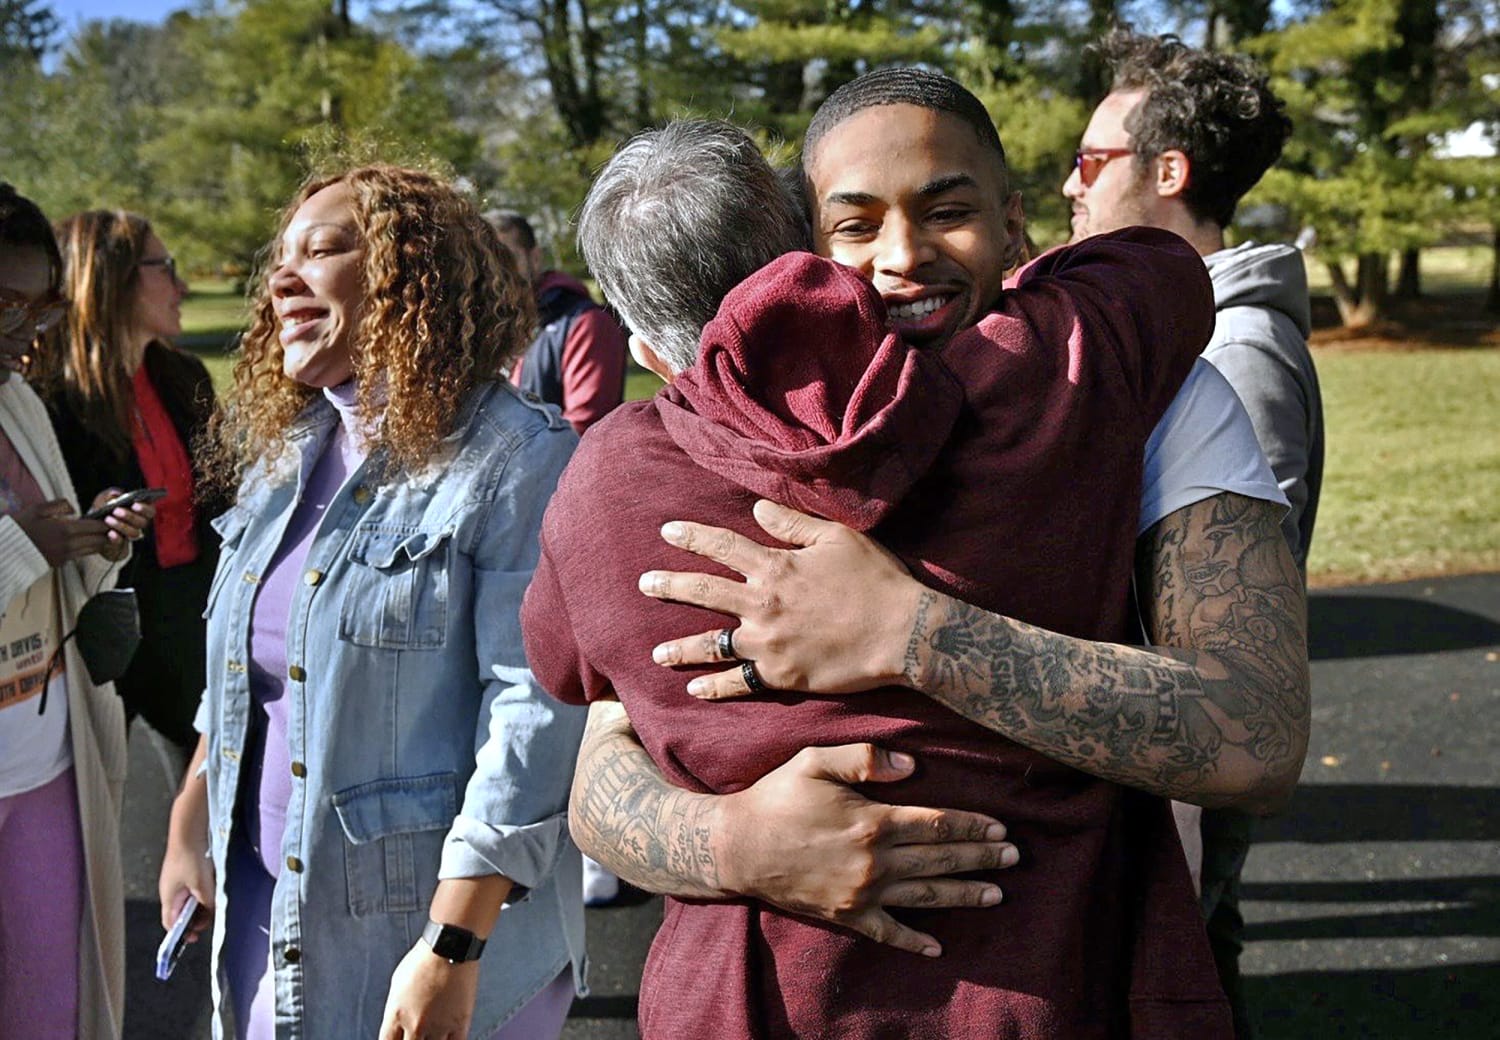 Baltimore man who stood trial 4 times in killing is freed after charges are dismissed